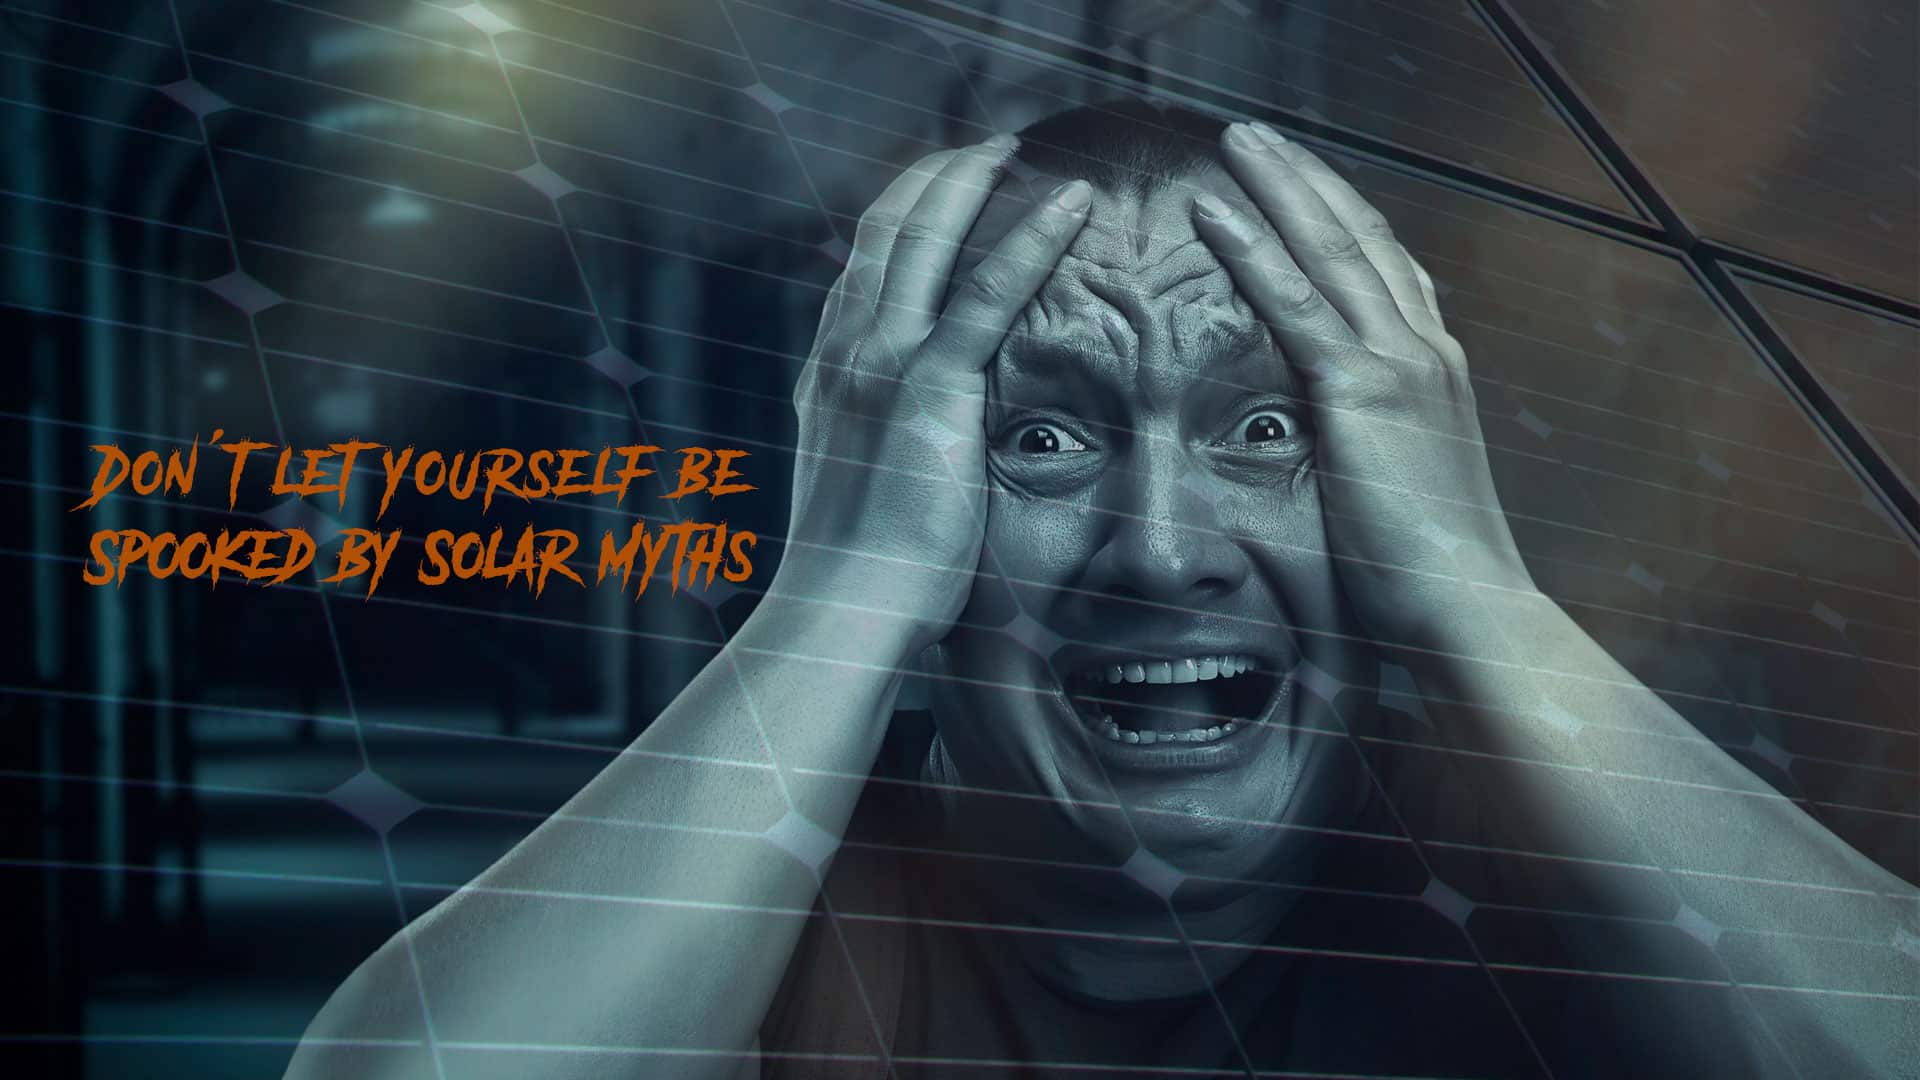 Spooked by Solar Myths